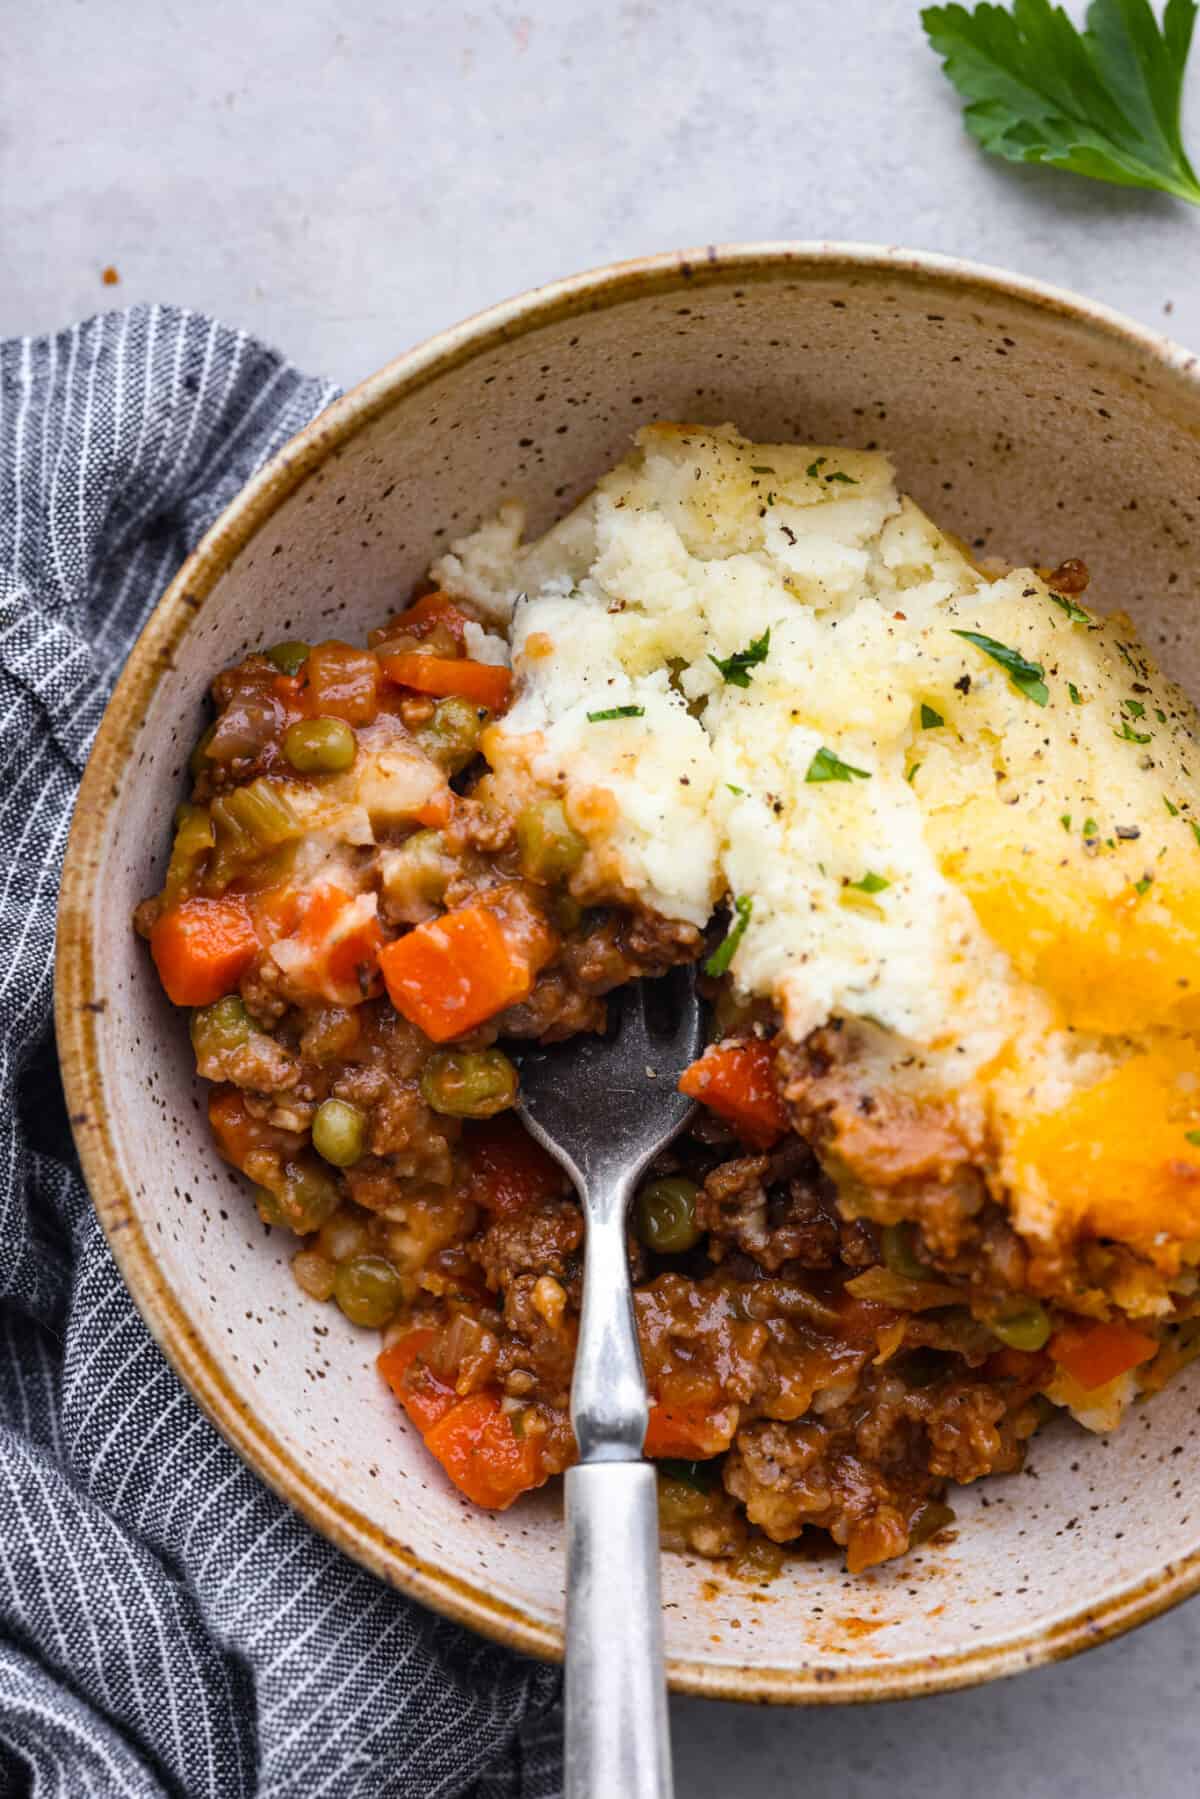 A serving of the meat, vegetables, and mashed potatoes - Homemade Shepherd’s Pie